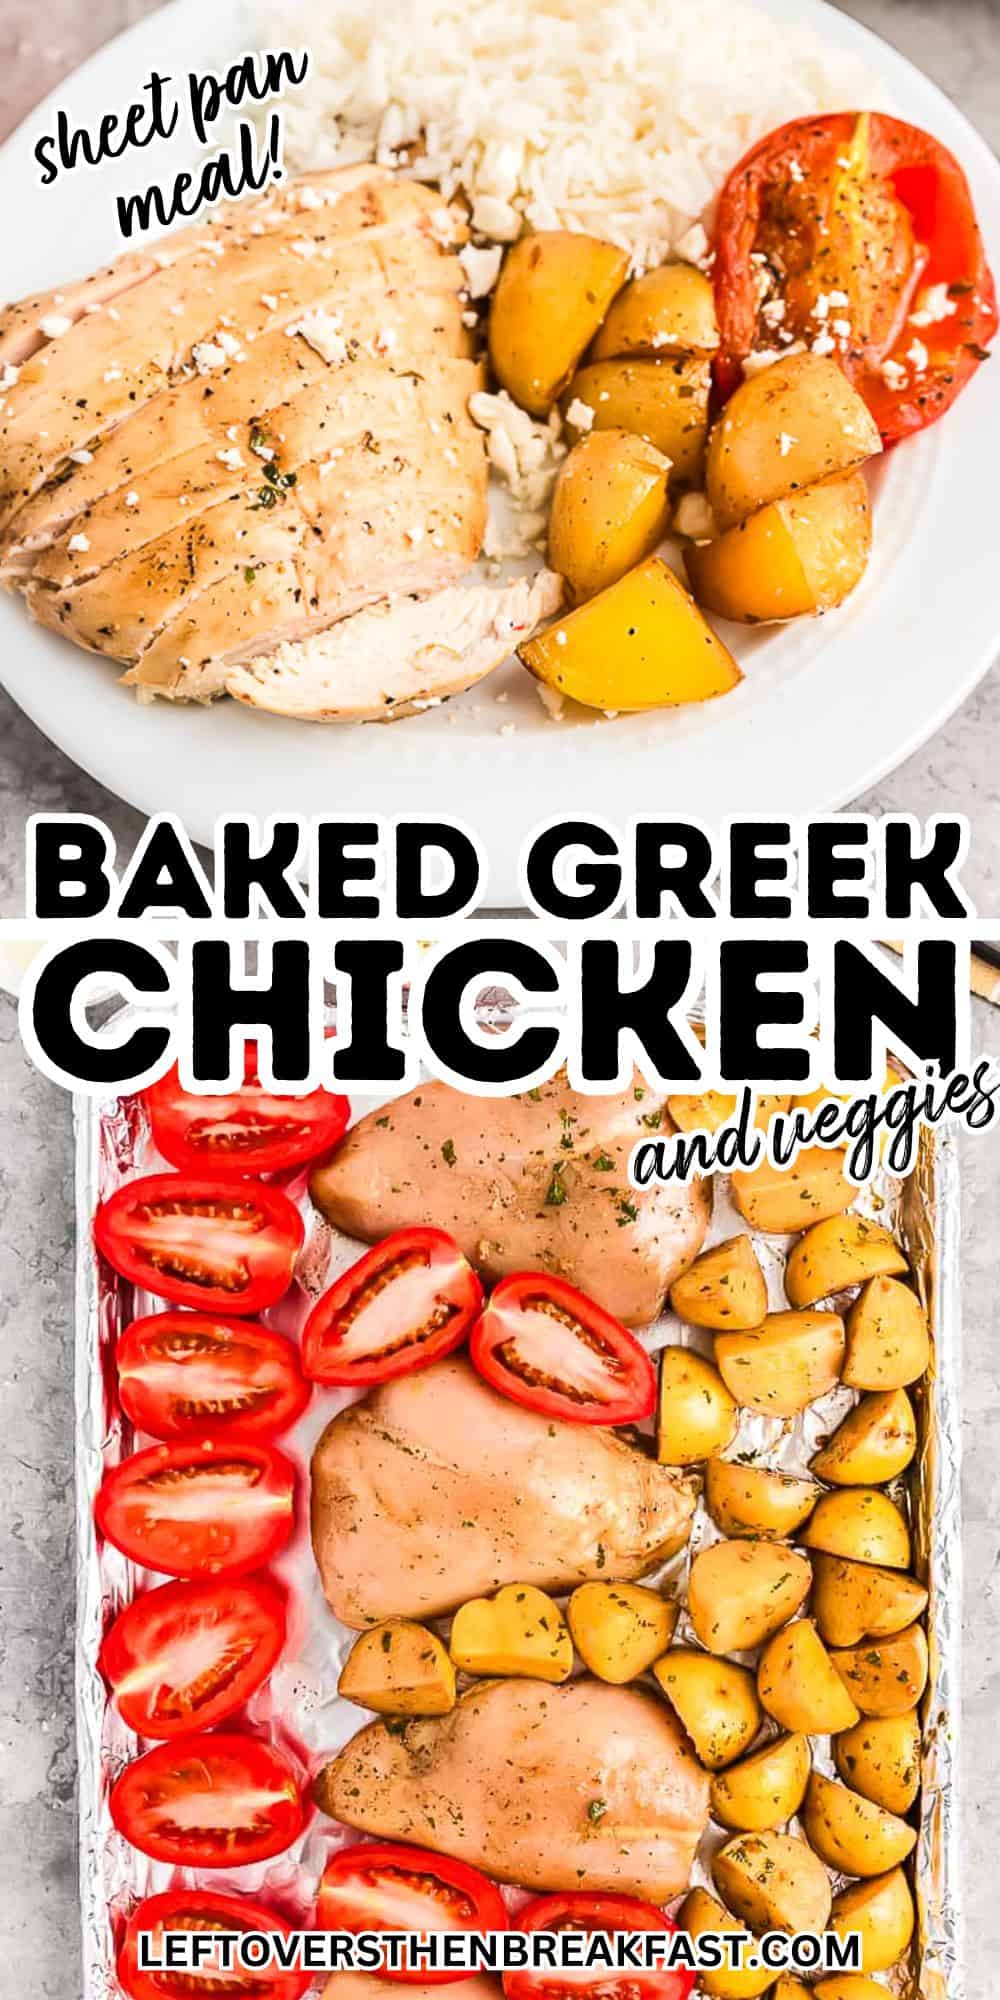 sheet pan baked Greek chicken pictures in a collage